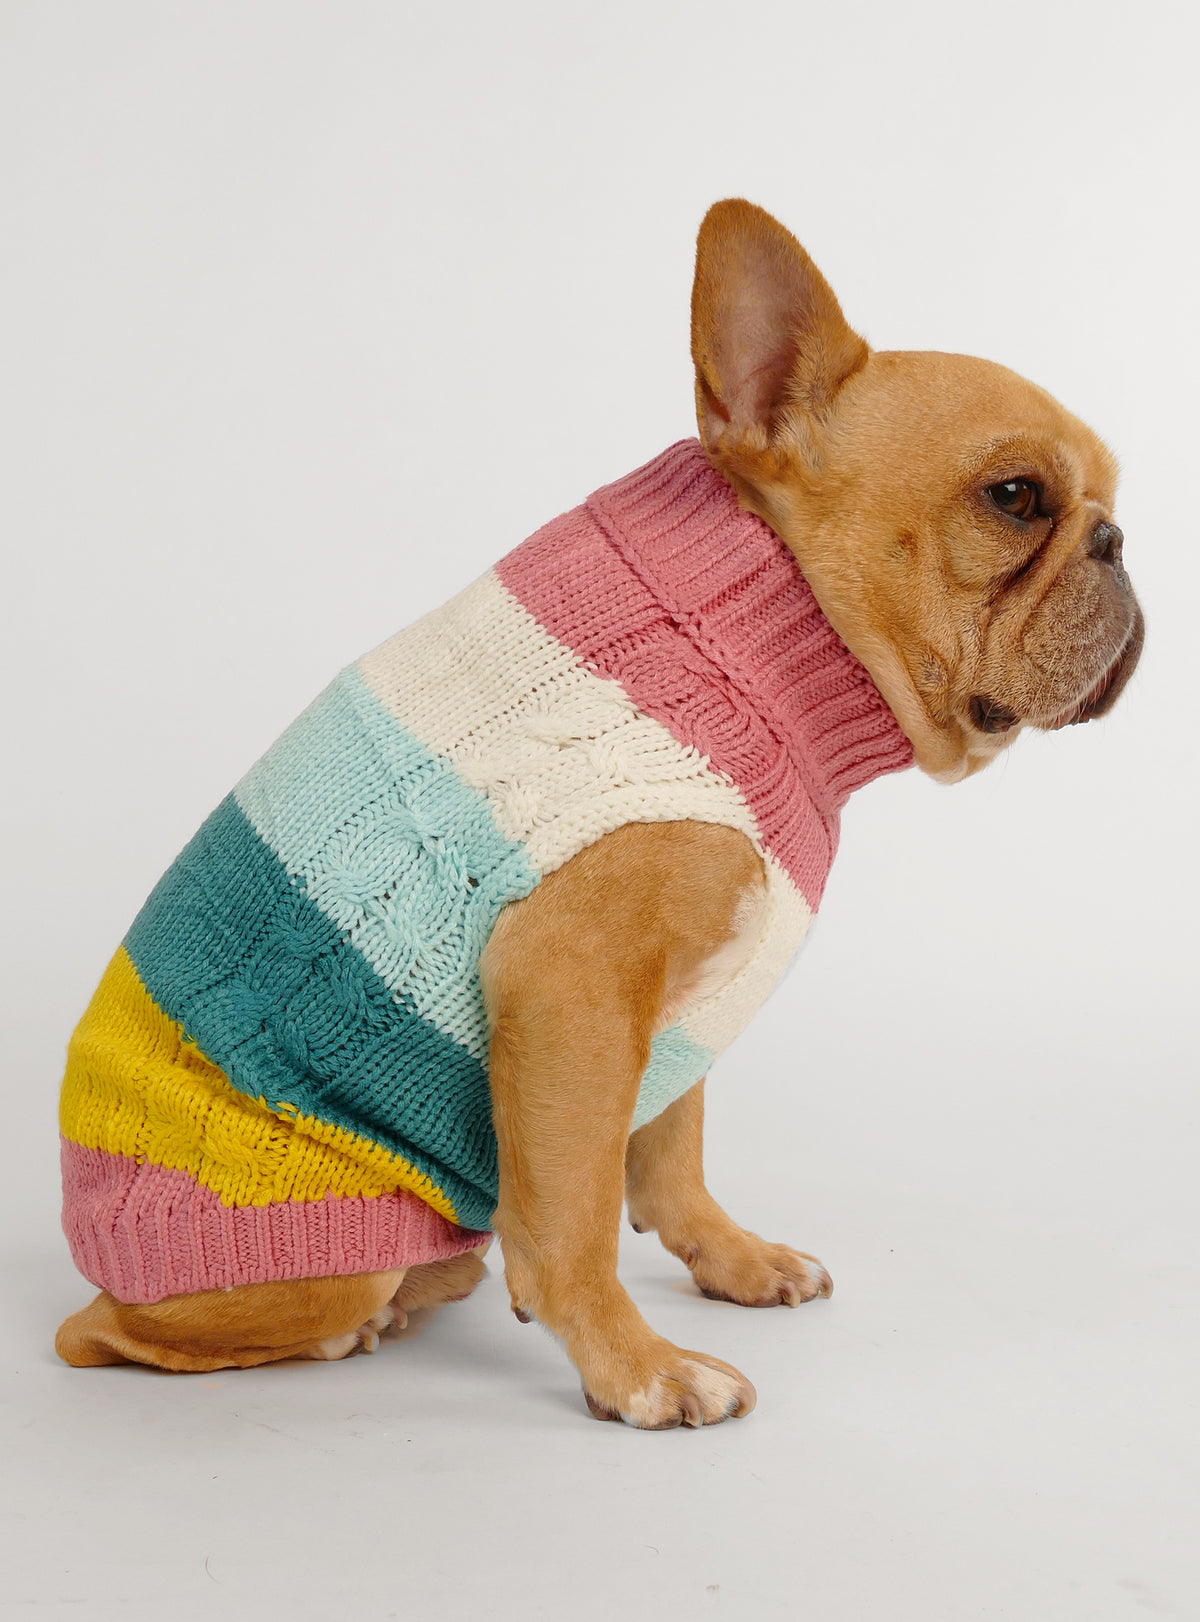 The Colorblock Dog Sweater